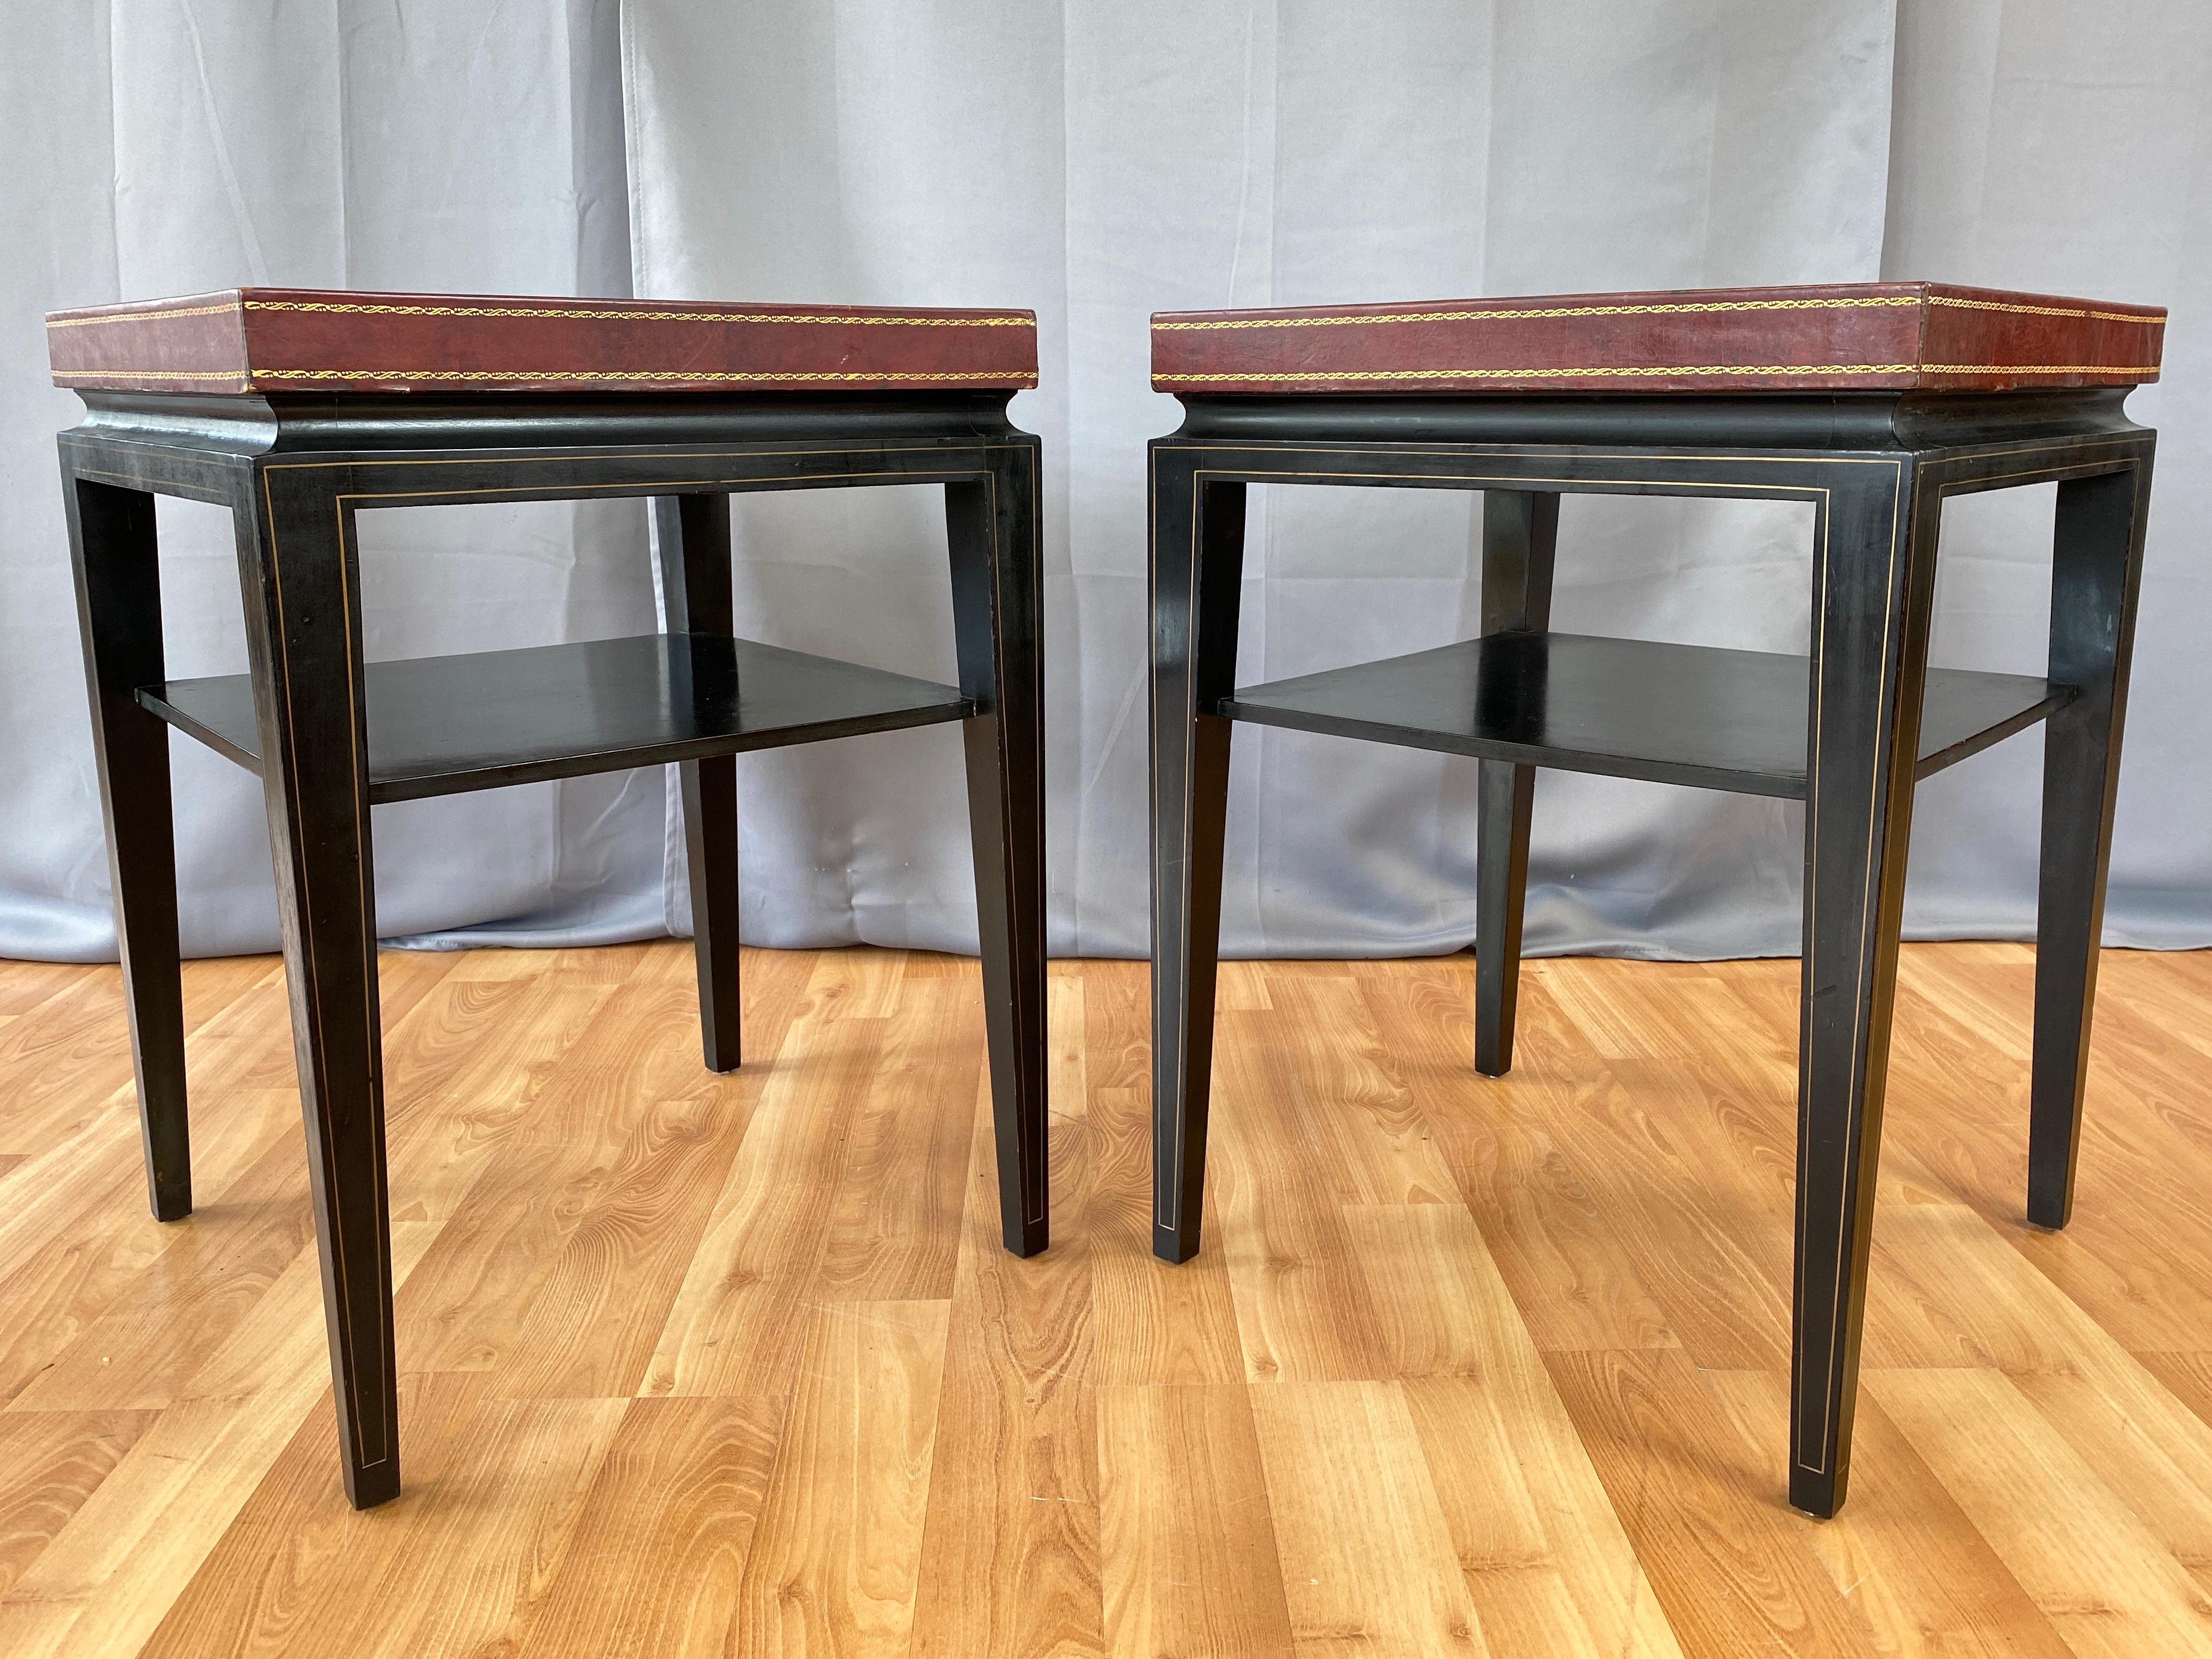 A pair of rare c. 1955 model 3303 occasional or end tables with leather top and ebonized mahogany frame by Tommi Parzinger for Charak Modern.

Exceptionally handsome Hollywood Regency design distinguished by a two-inch-tall leather-clad top with